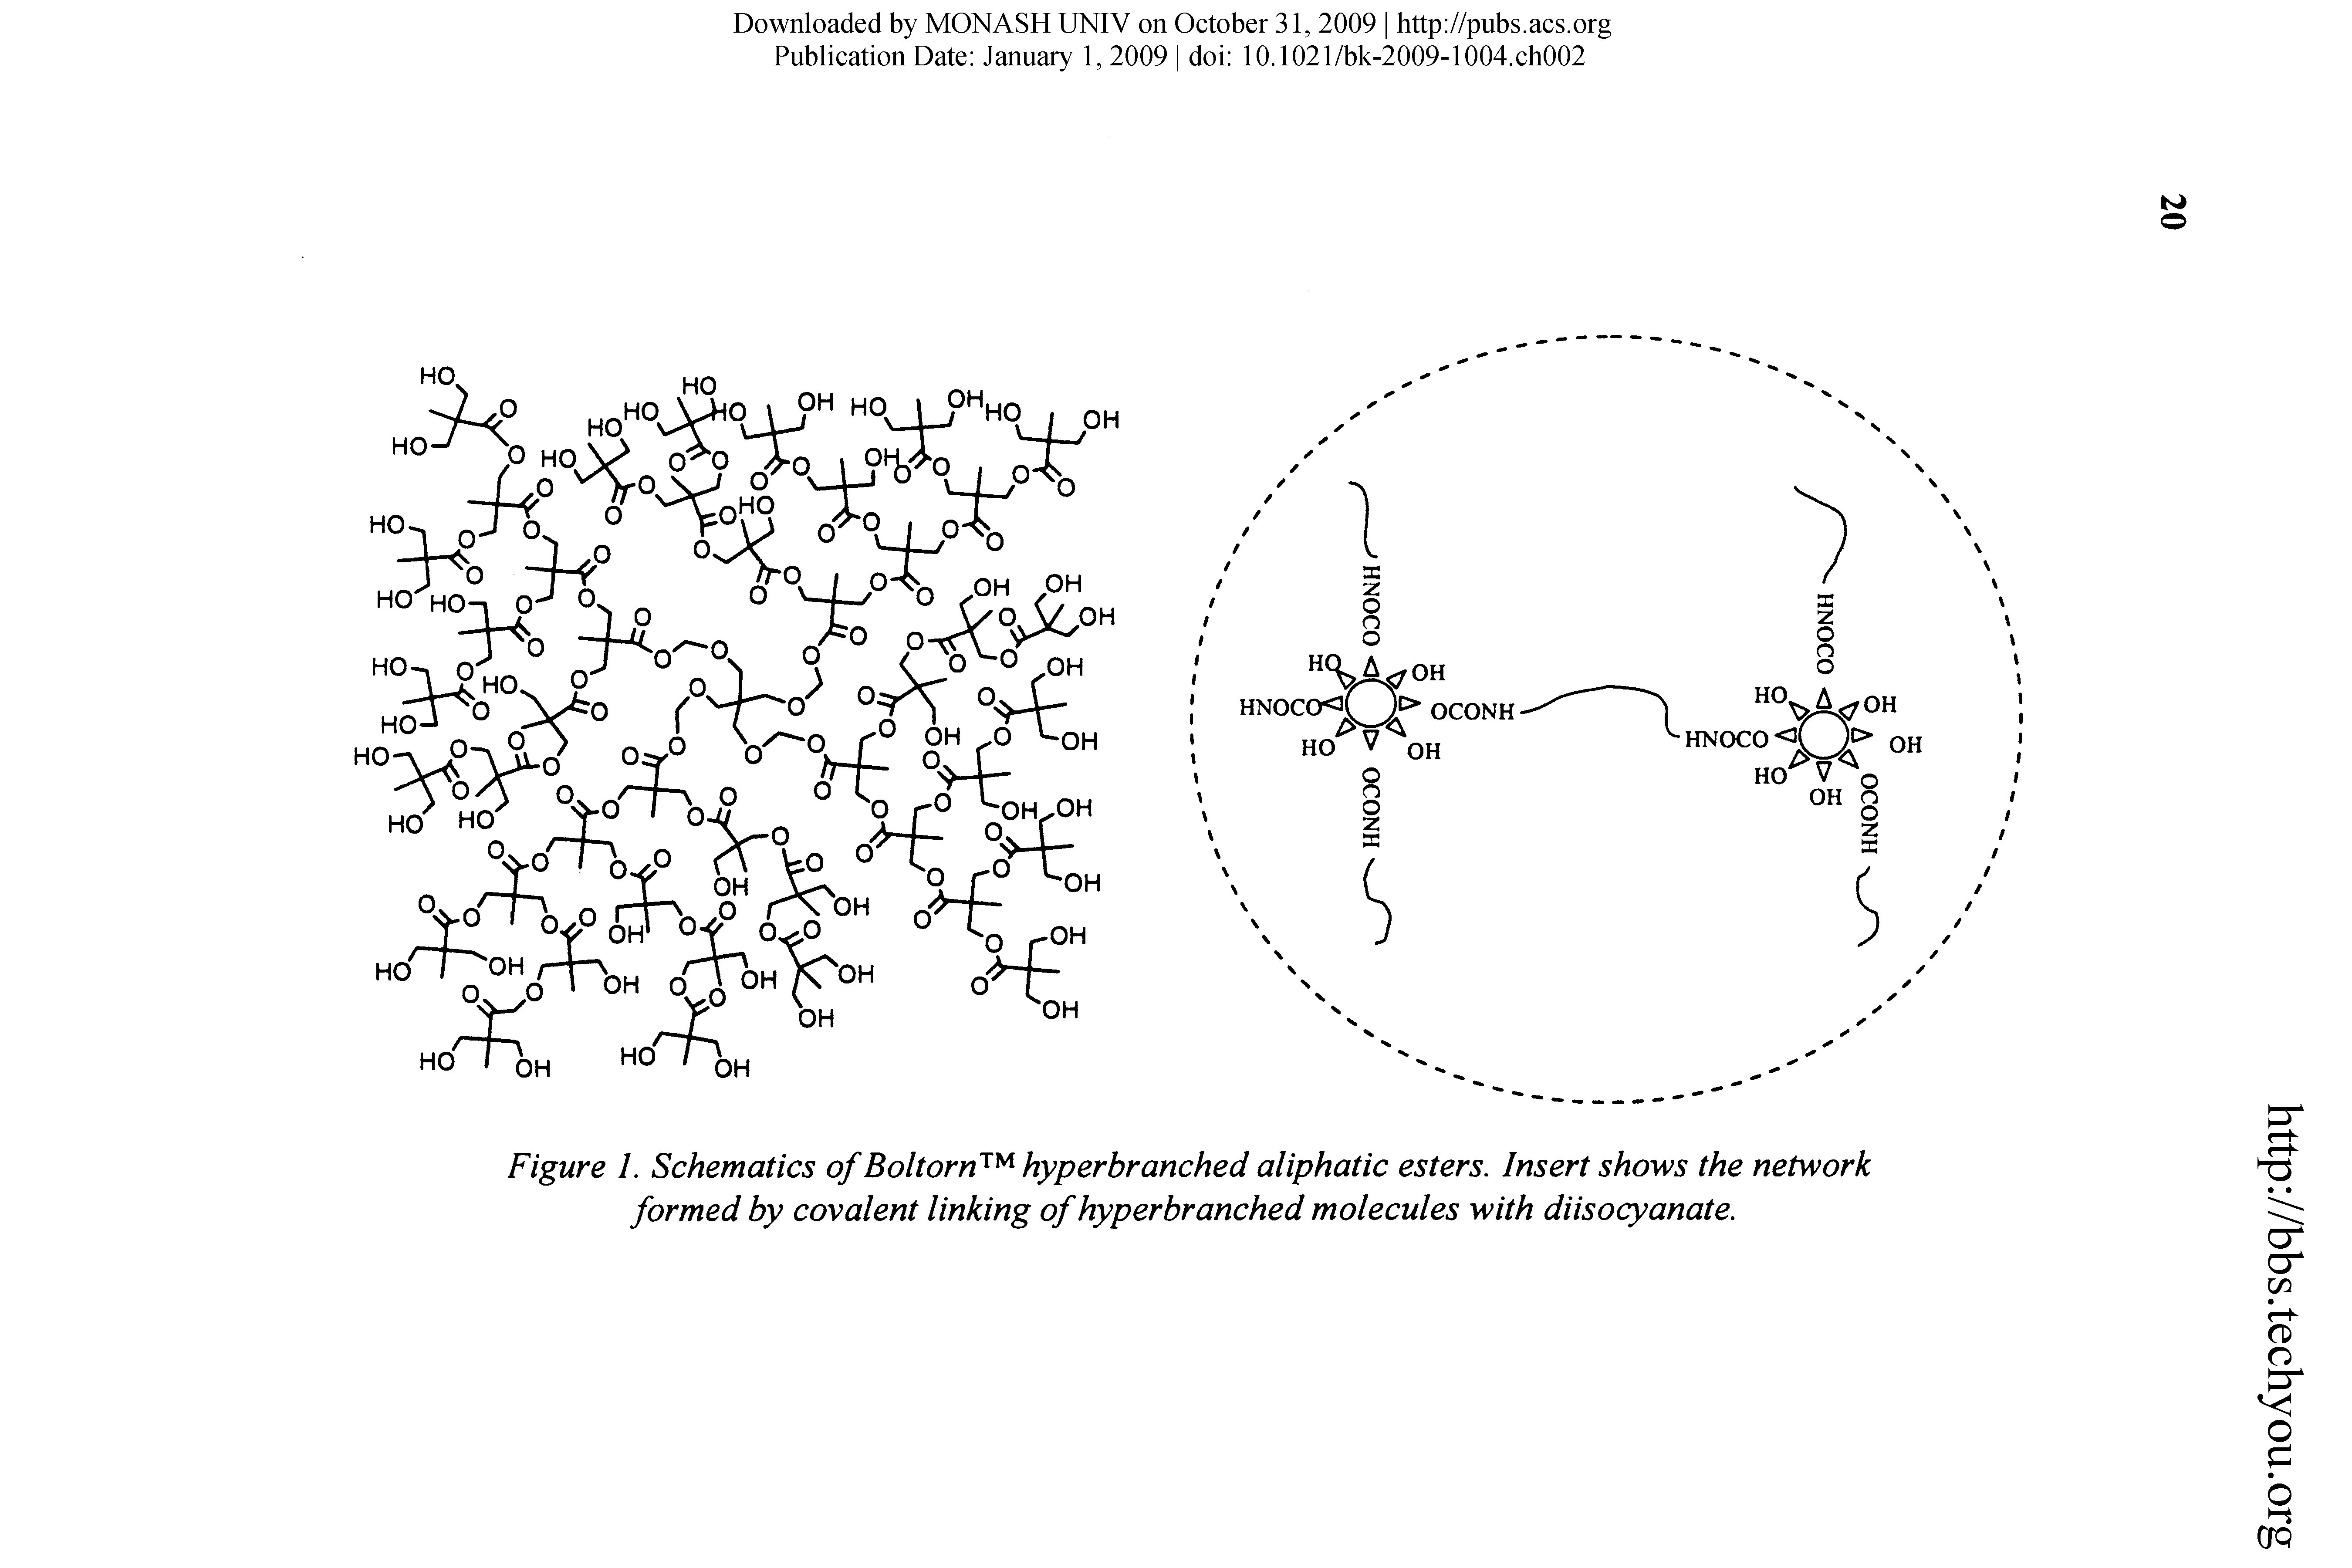 Figure 1. Schematics of Boltorn hyperbranched aliphatic esters. Insert shows the network formed by covalent linking of hyperbranched molecules with diisocyanate.